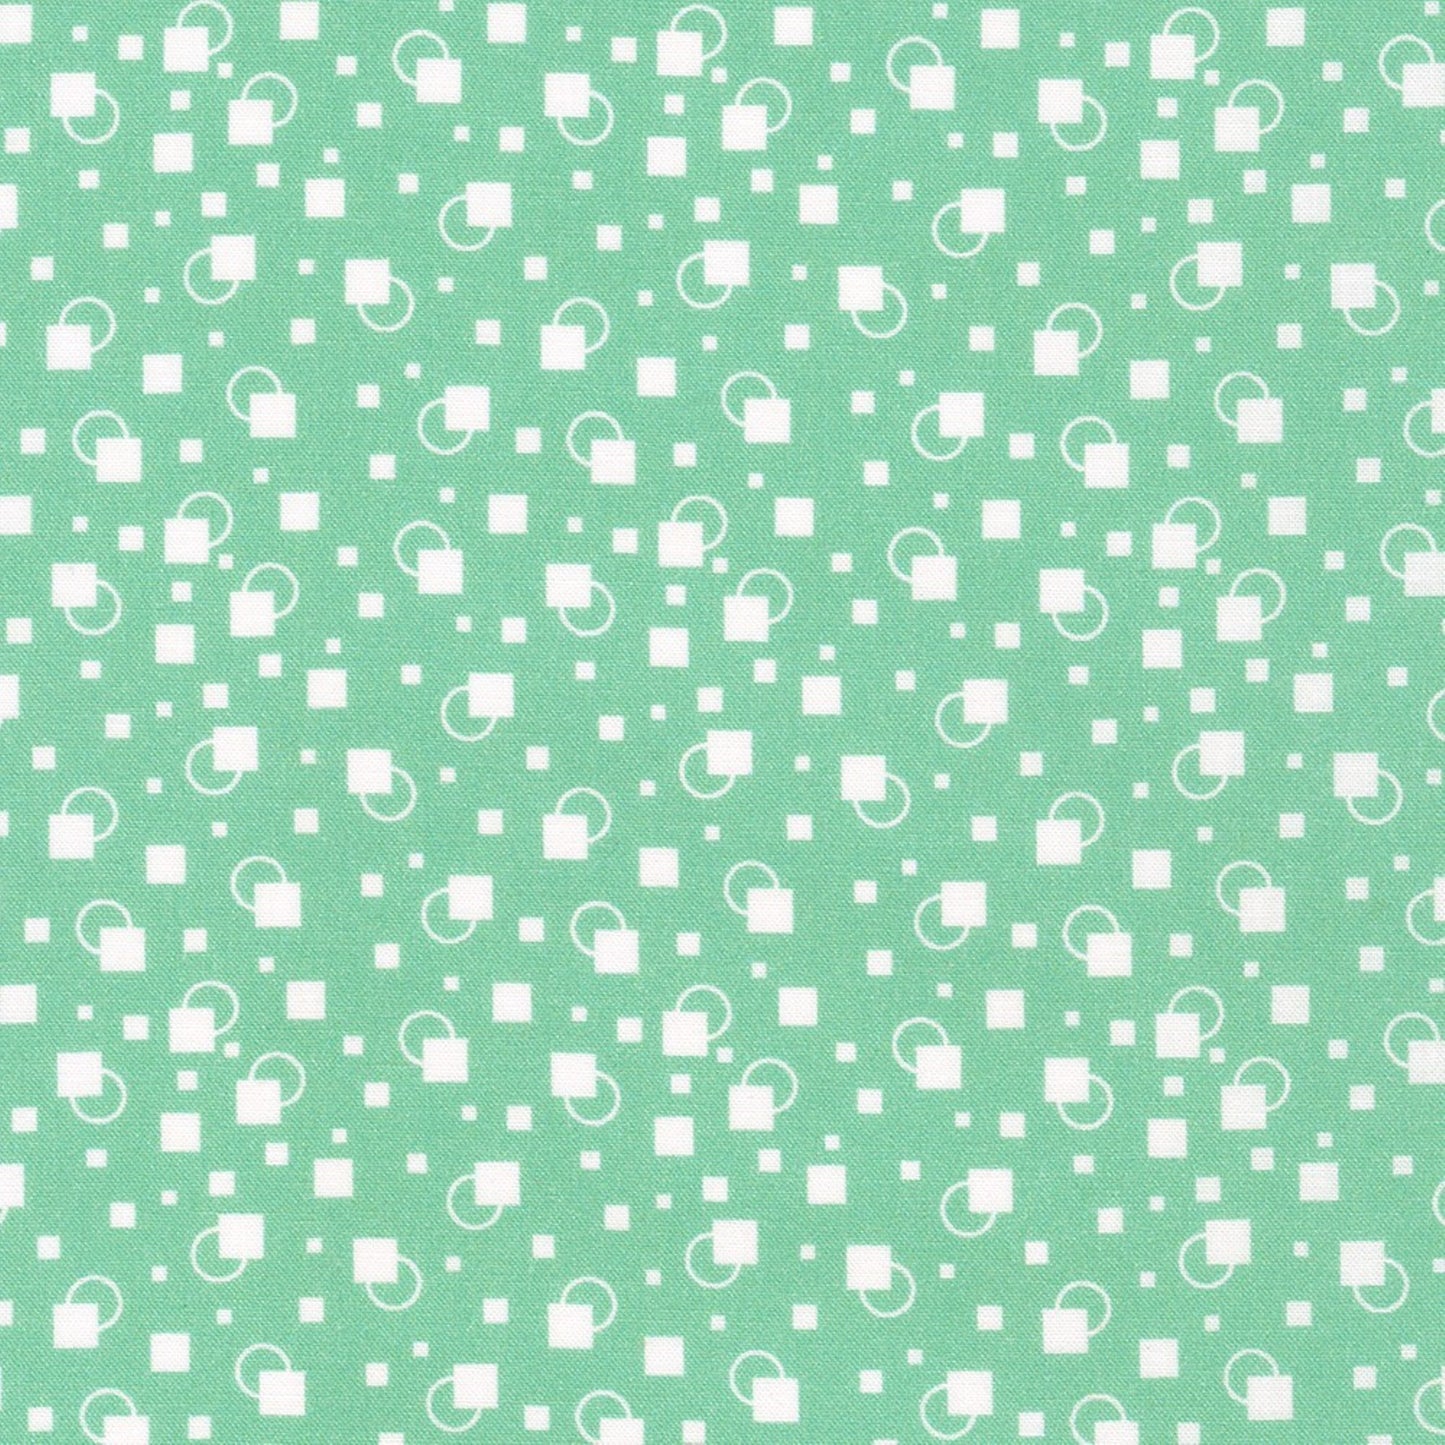 Little Blossoms geometric green white 1930's style floral Kaufman cotton quilt fabric